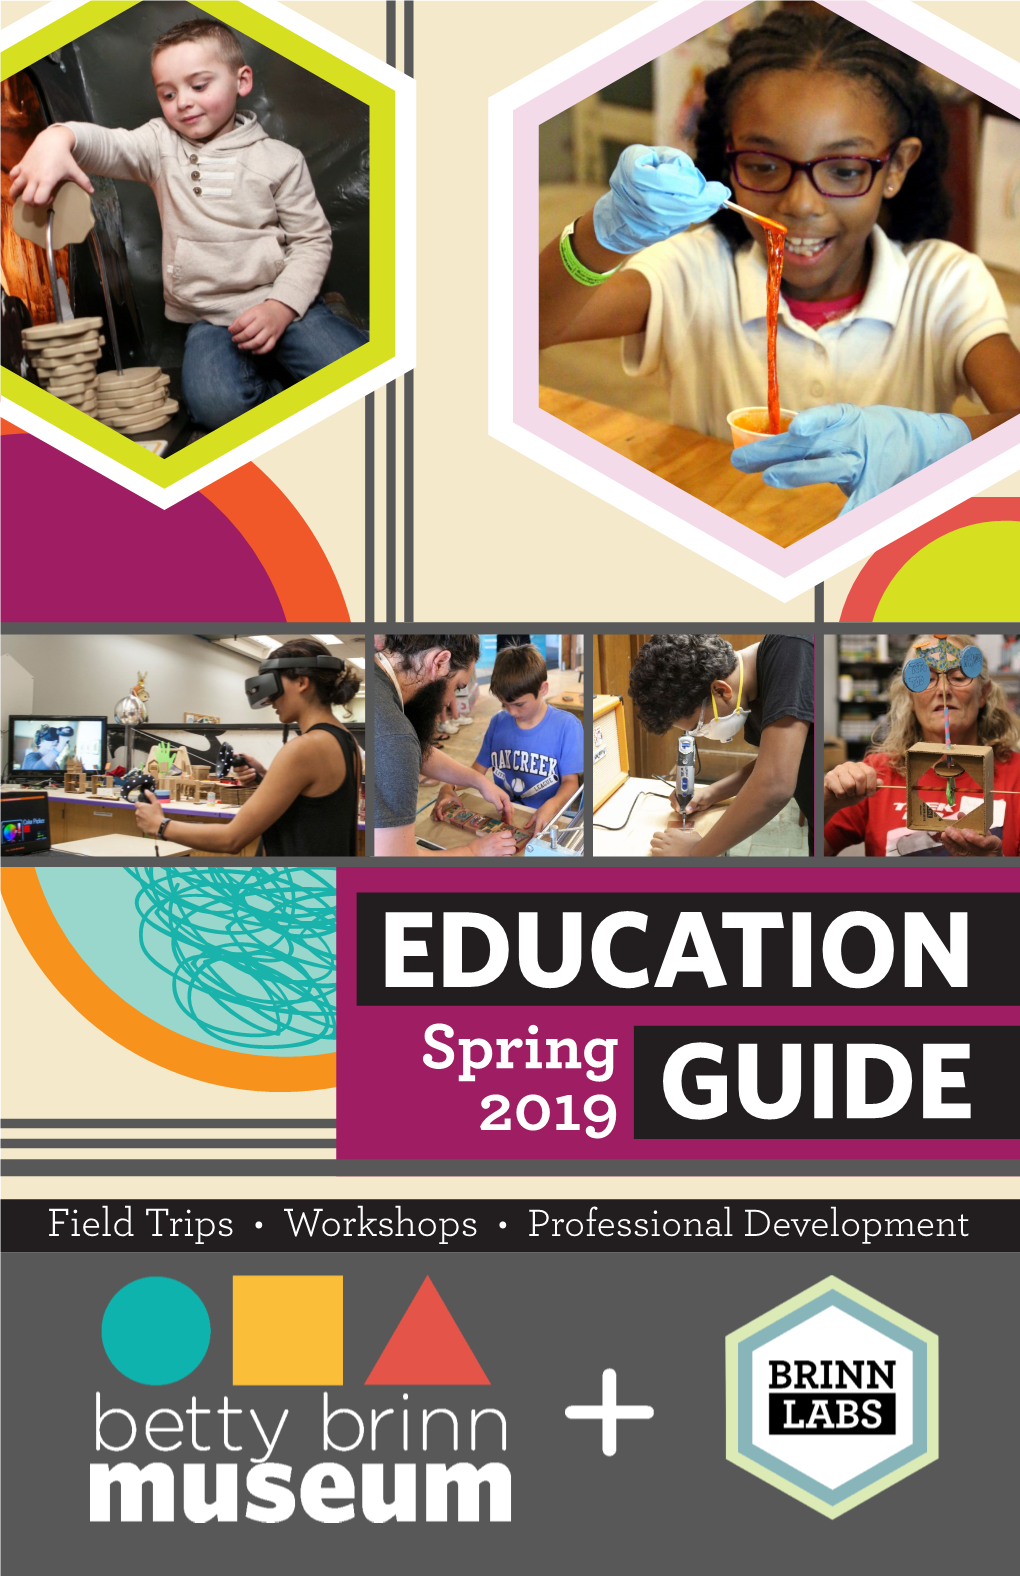 Education Guide Overview